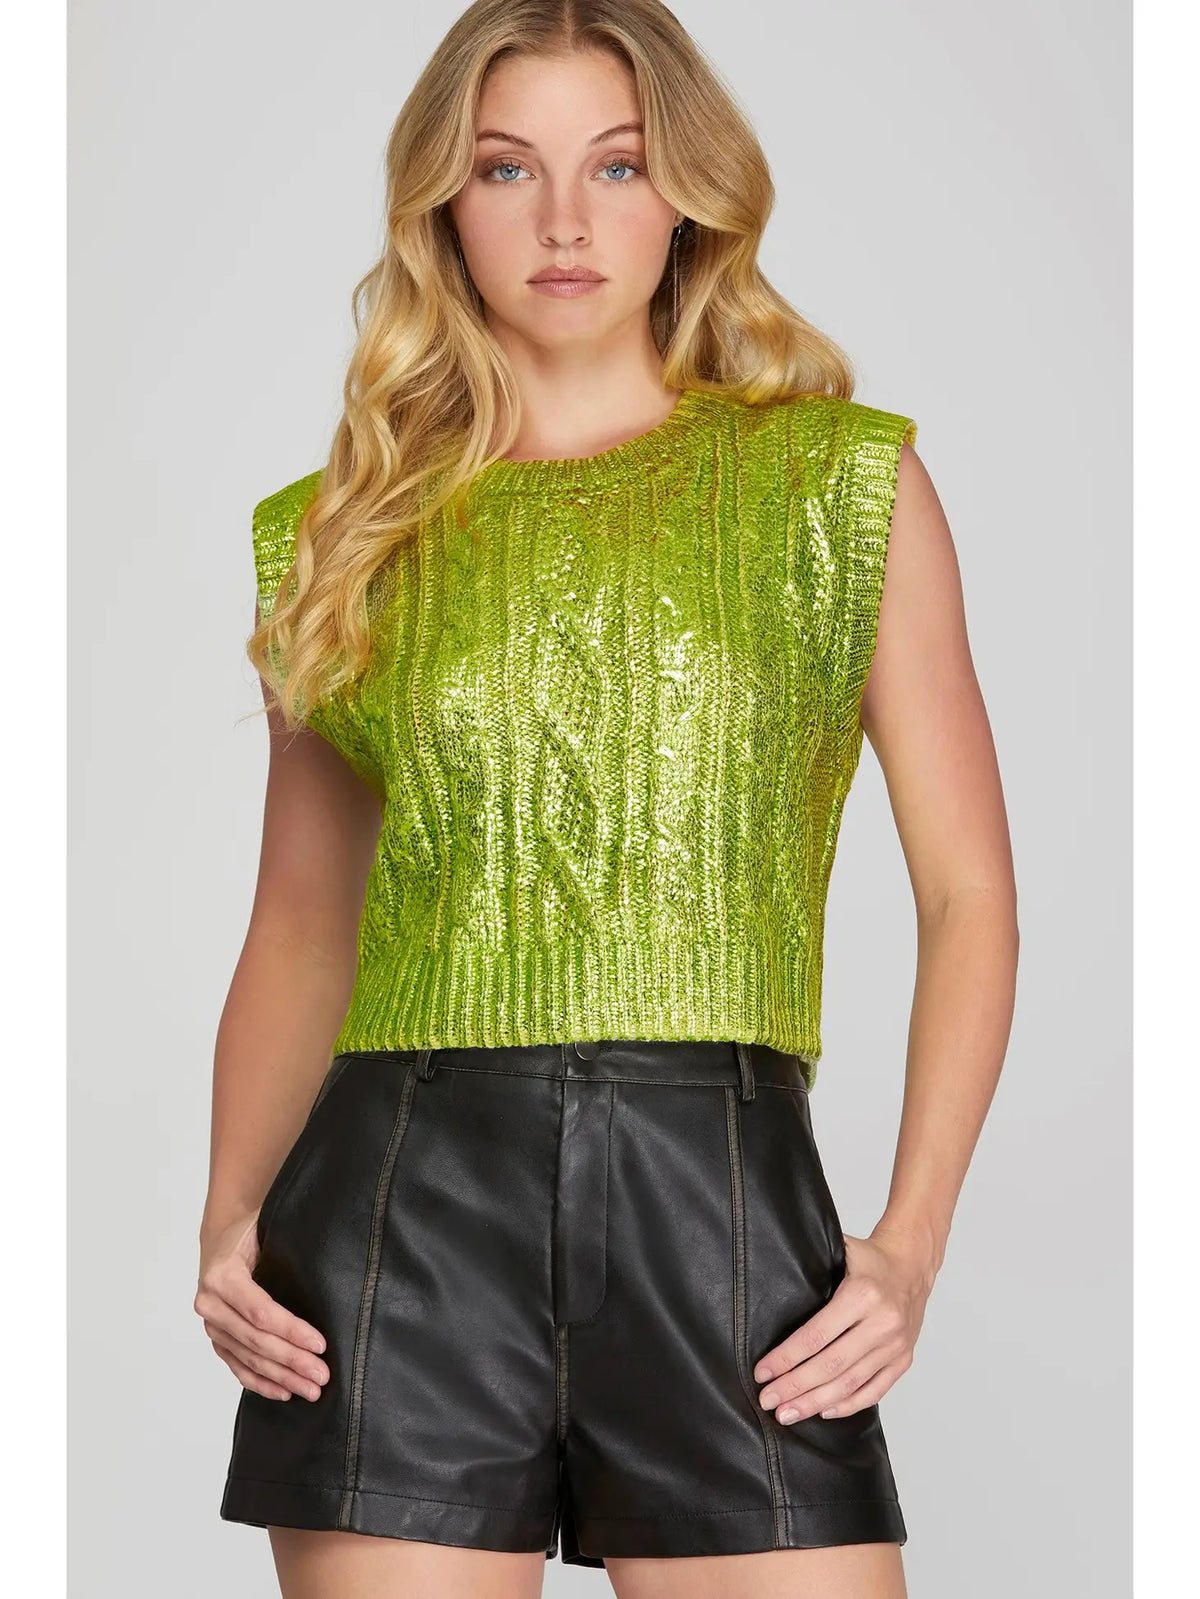 Cable Knit Metallic Green Sweater-Tops & Tees-Deadwood South Boutique & Company-Deadwood South Boutique, Women's Fashion Boutique in Henderson, TX